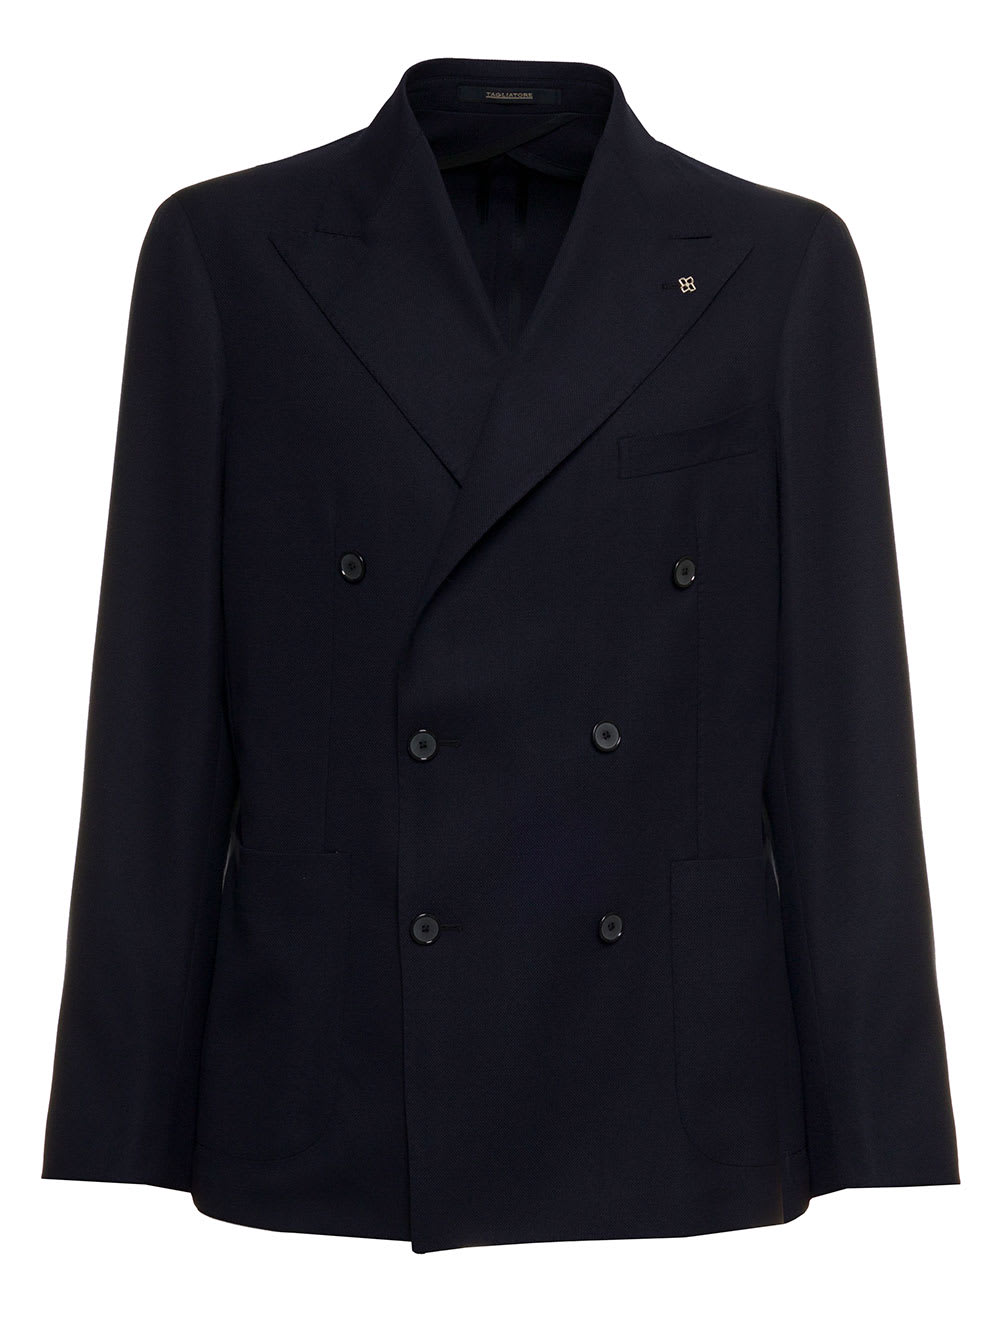 Tagliatore Mens Double-breasted Blue Wool Jacket